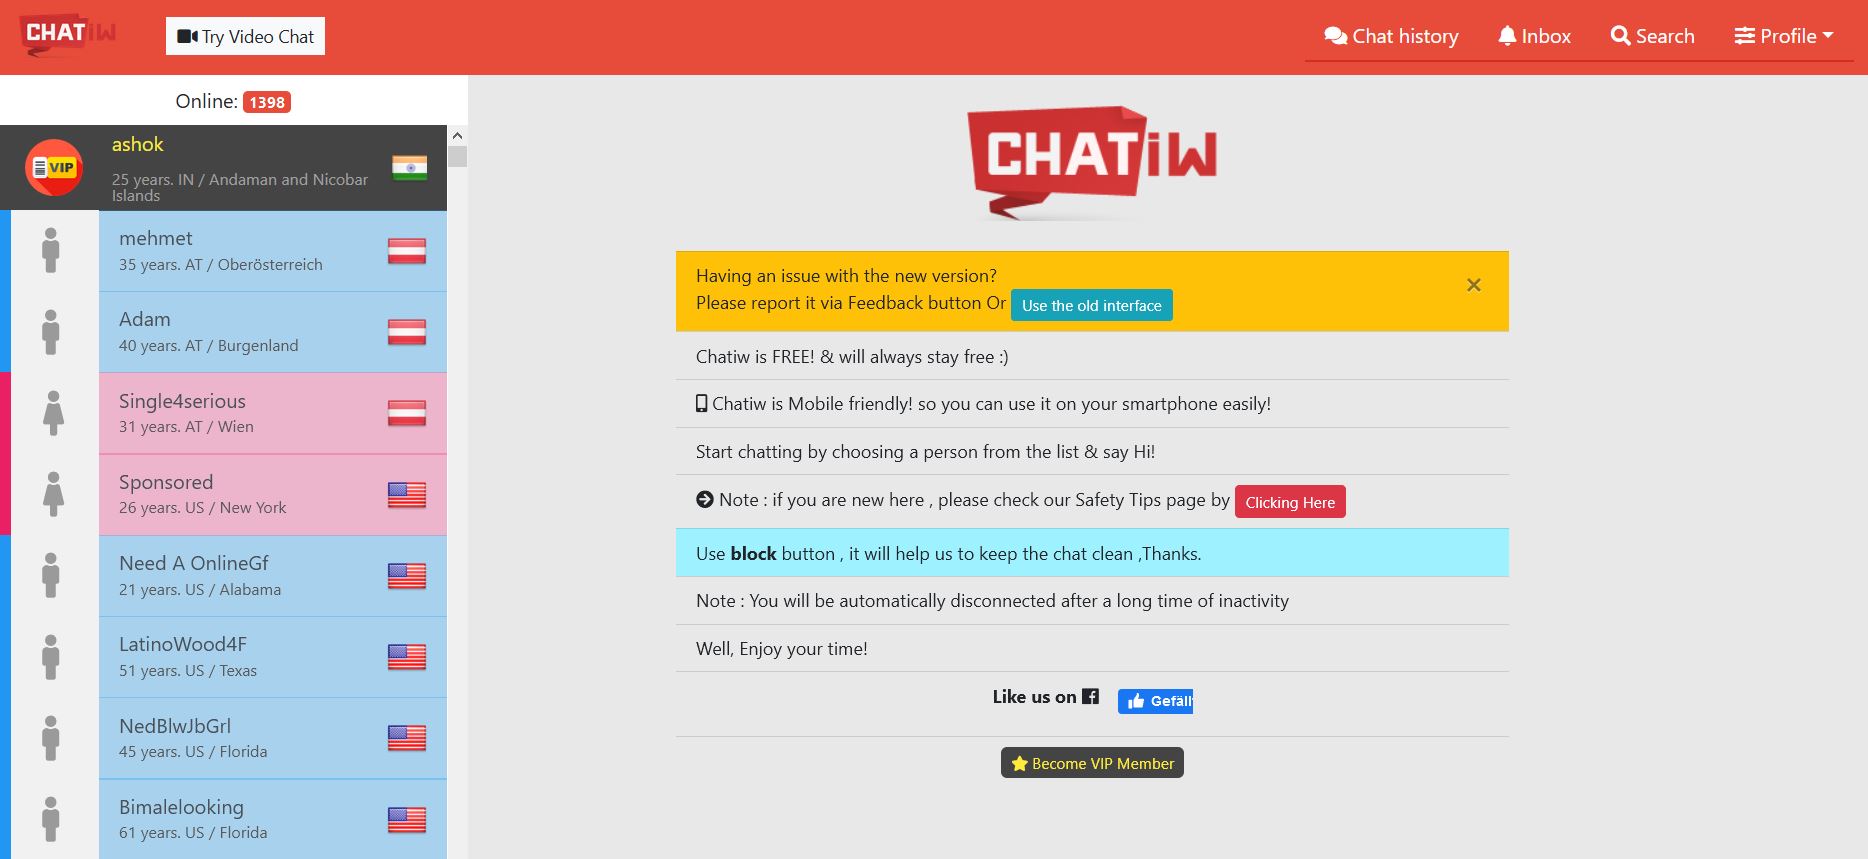 chatiw - offers many users.